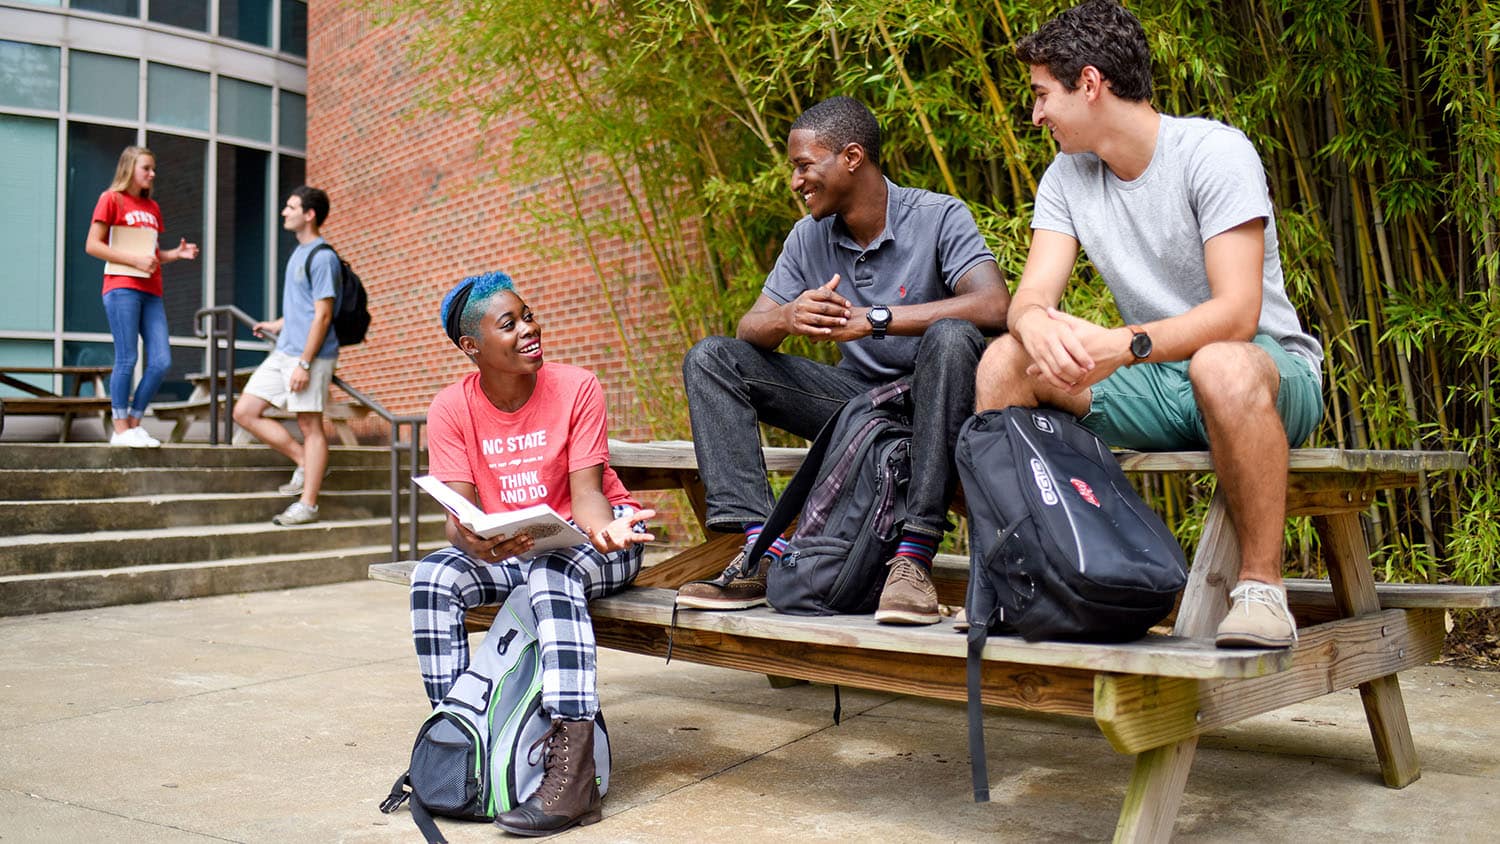 Students talk and laugh while sitting at a picnic table.